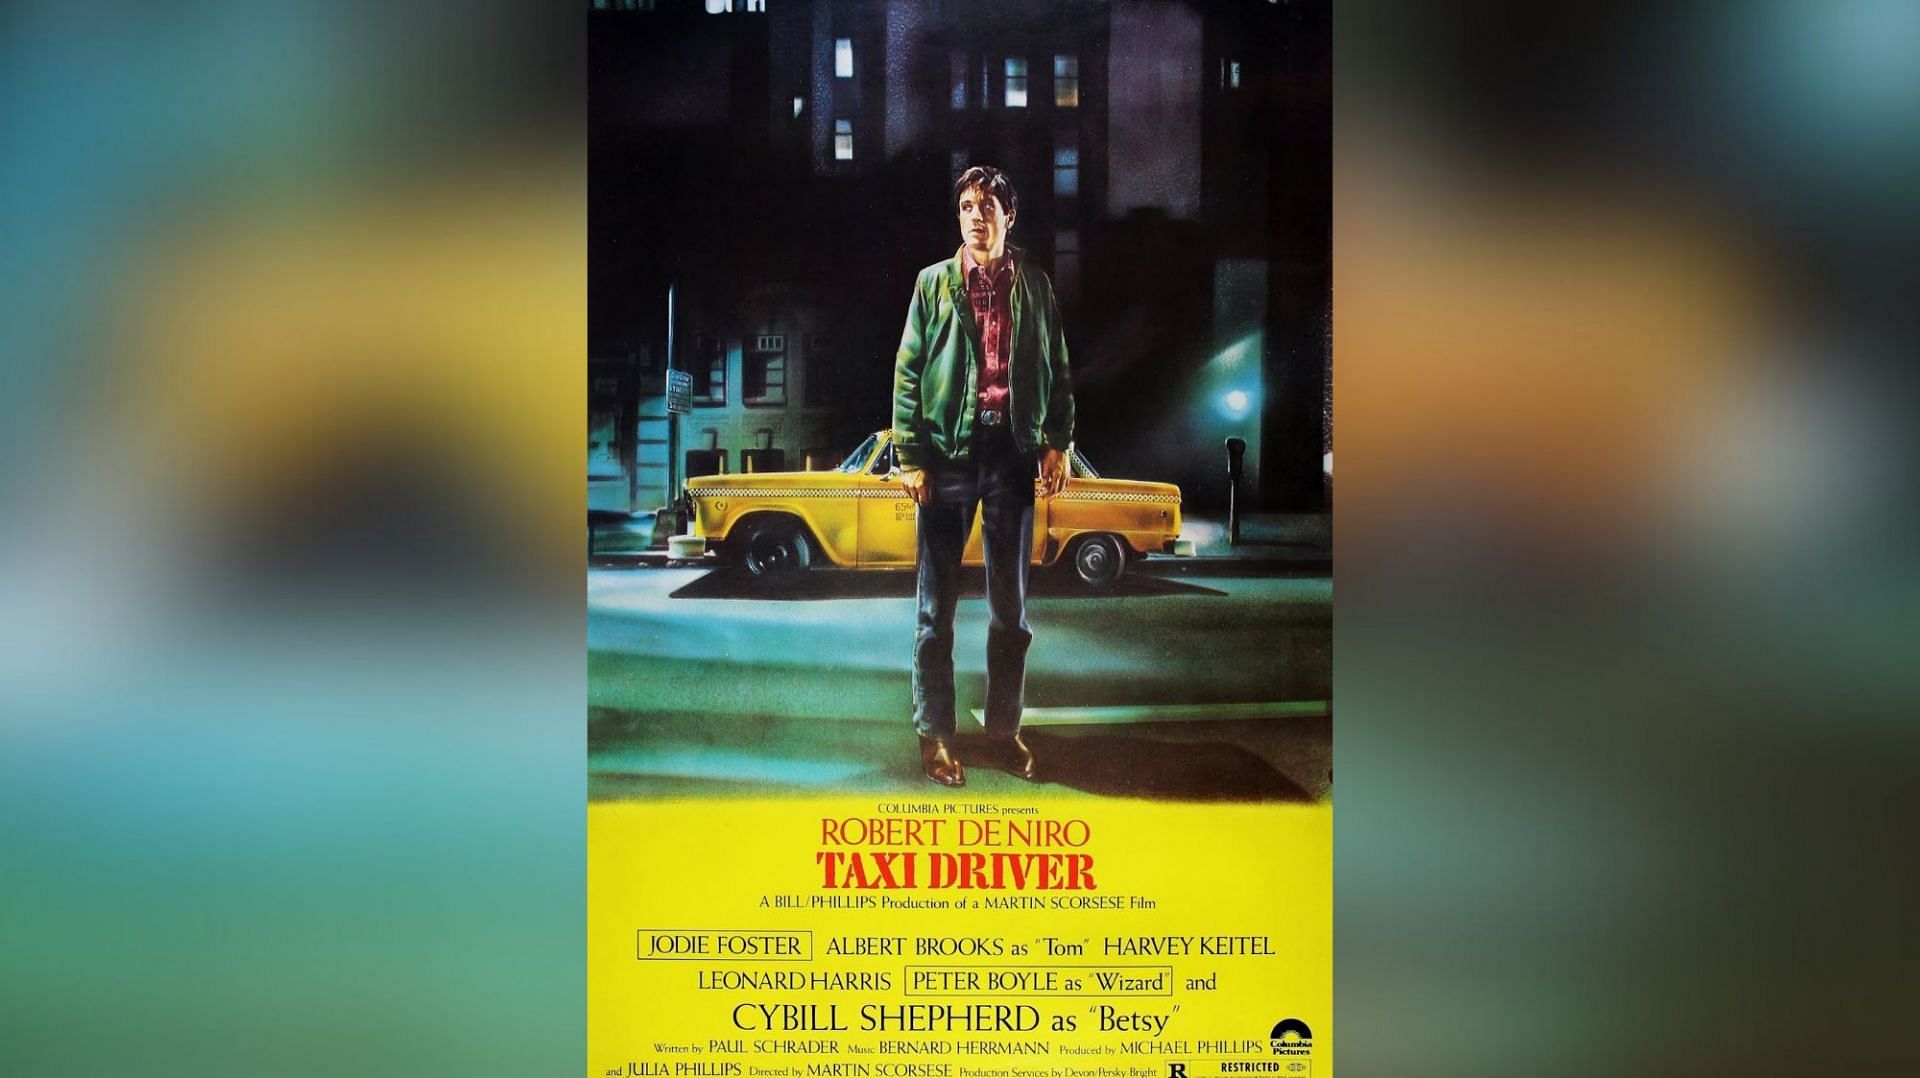 Taxi Driver (Image via Sony Pictures)